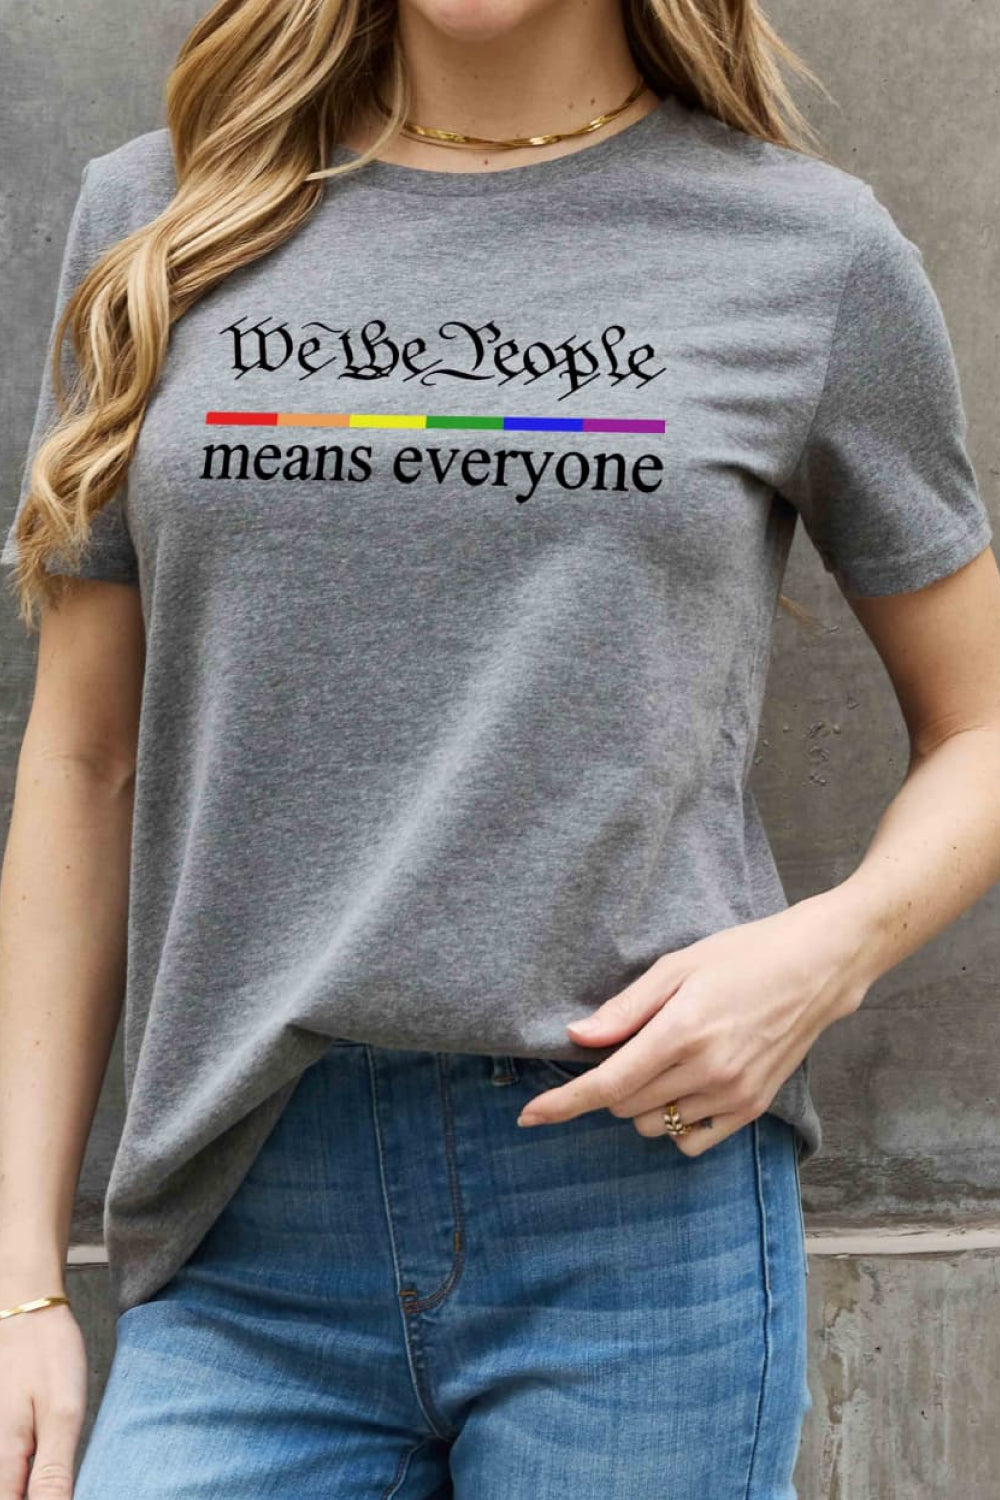 WE THE PEOPLE MEANS EVERYONE Graphic Tee